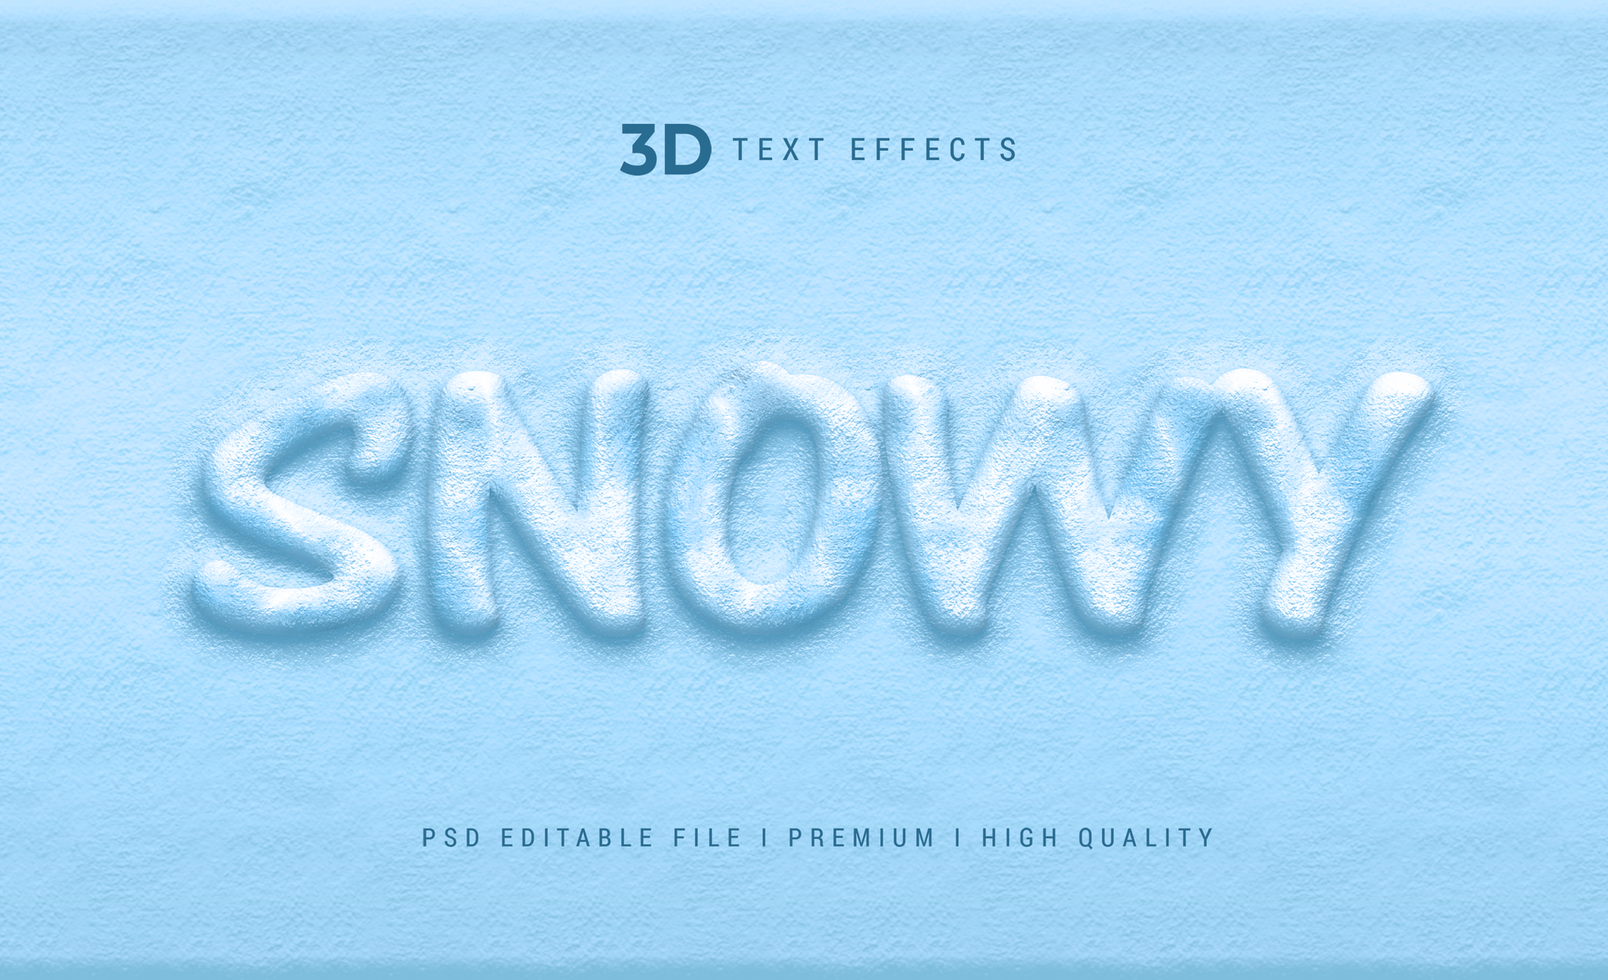 Snowy 3d Text Style Effect Mockup Template psd